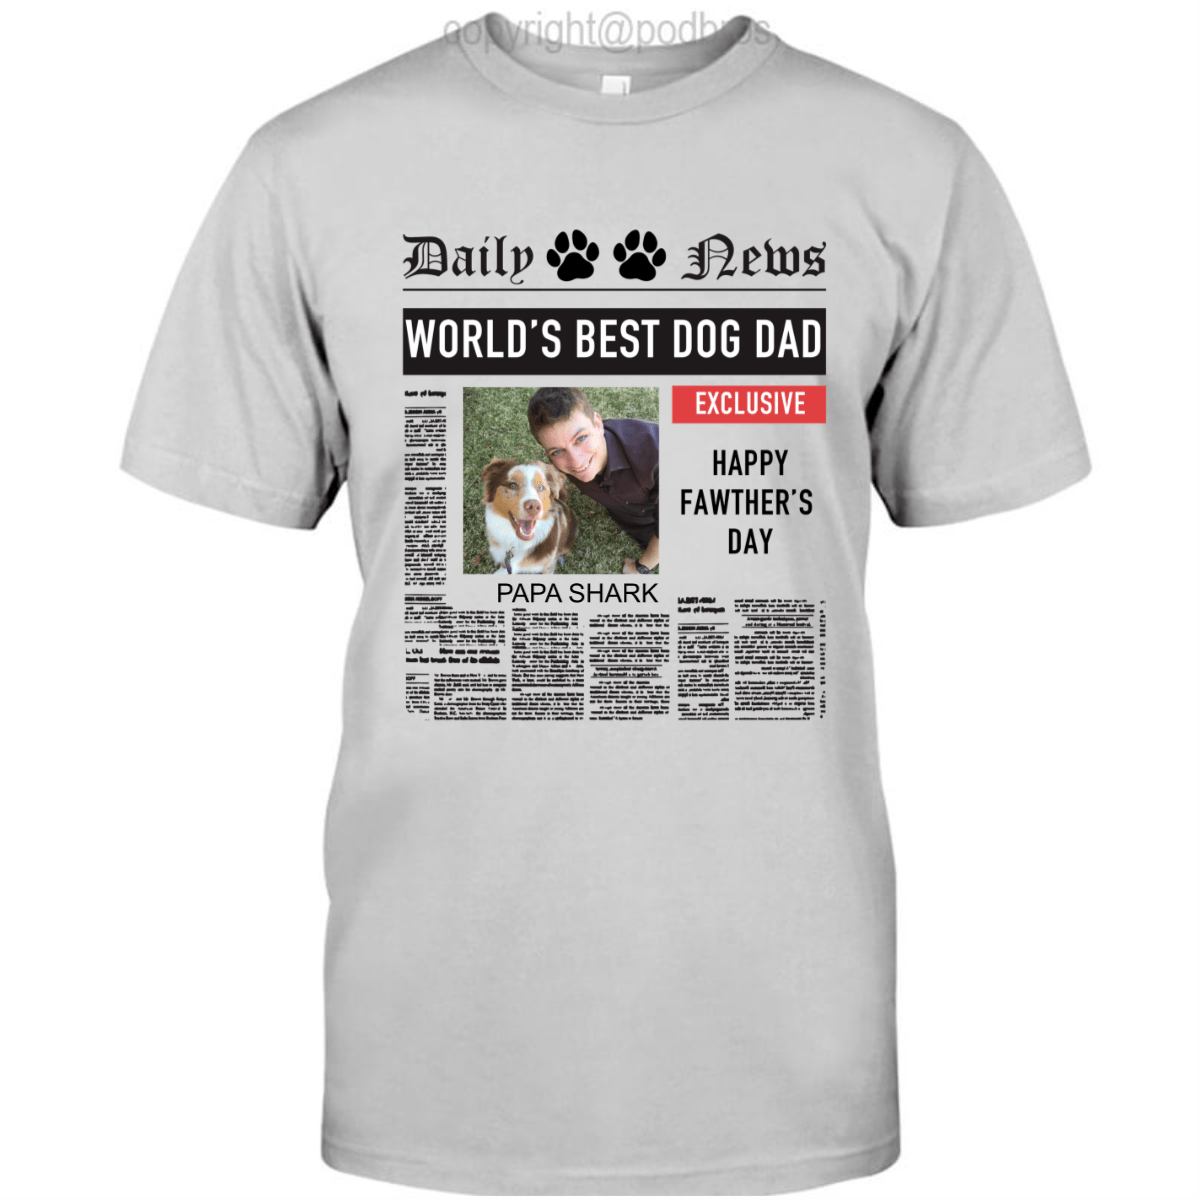 GeckoCustom Personalized Photo Custom T Shirt, Dog Lover Gift, Fathers Day Gift, Worlds Best Dog Dad